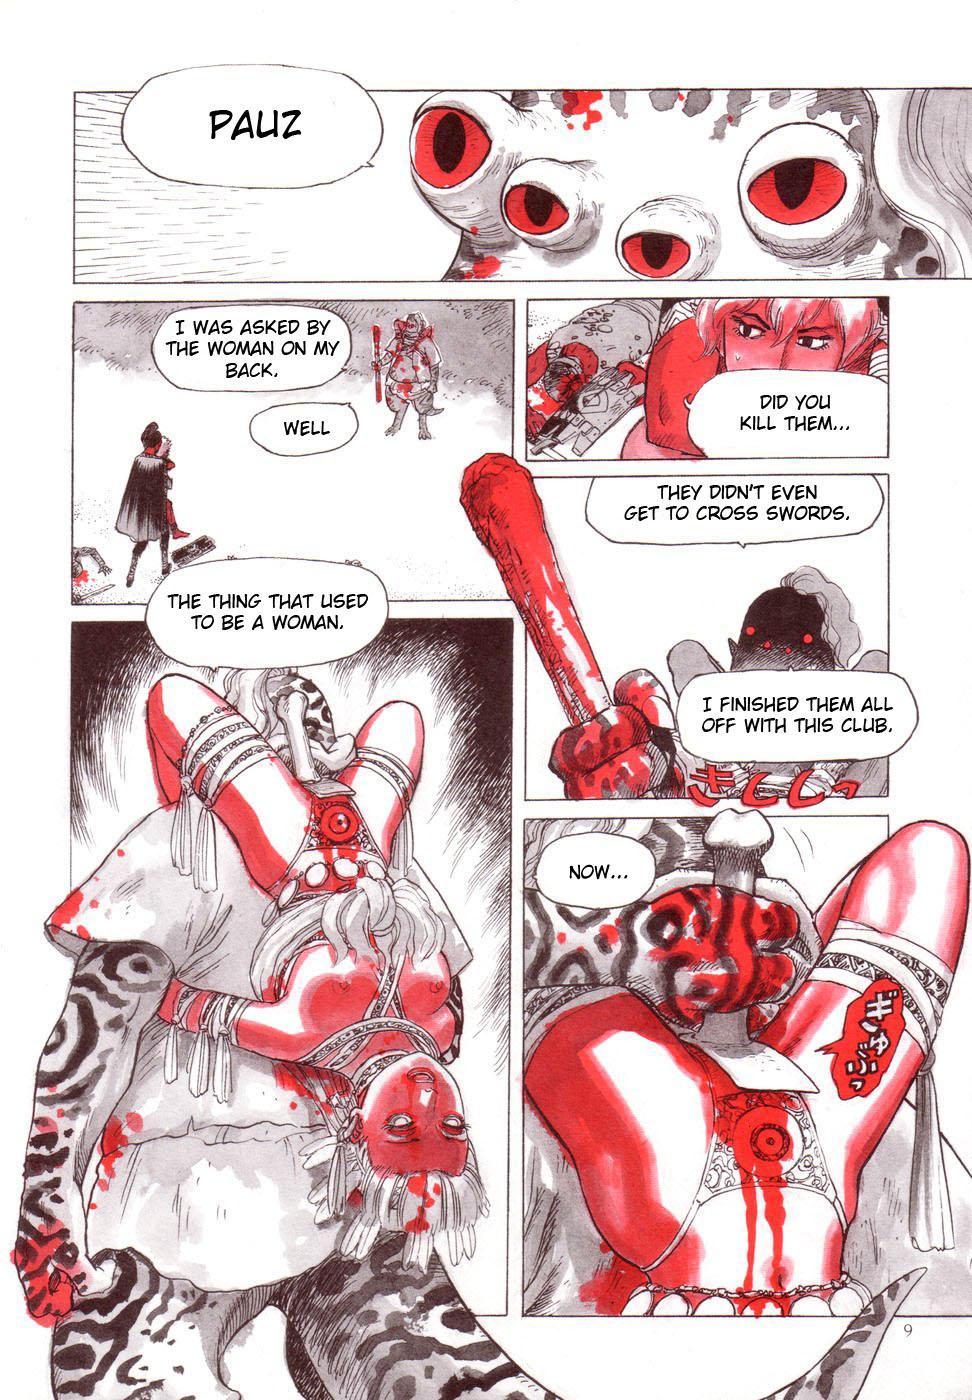 Doggystyle Rotten Sword Buttplug - Page 9